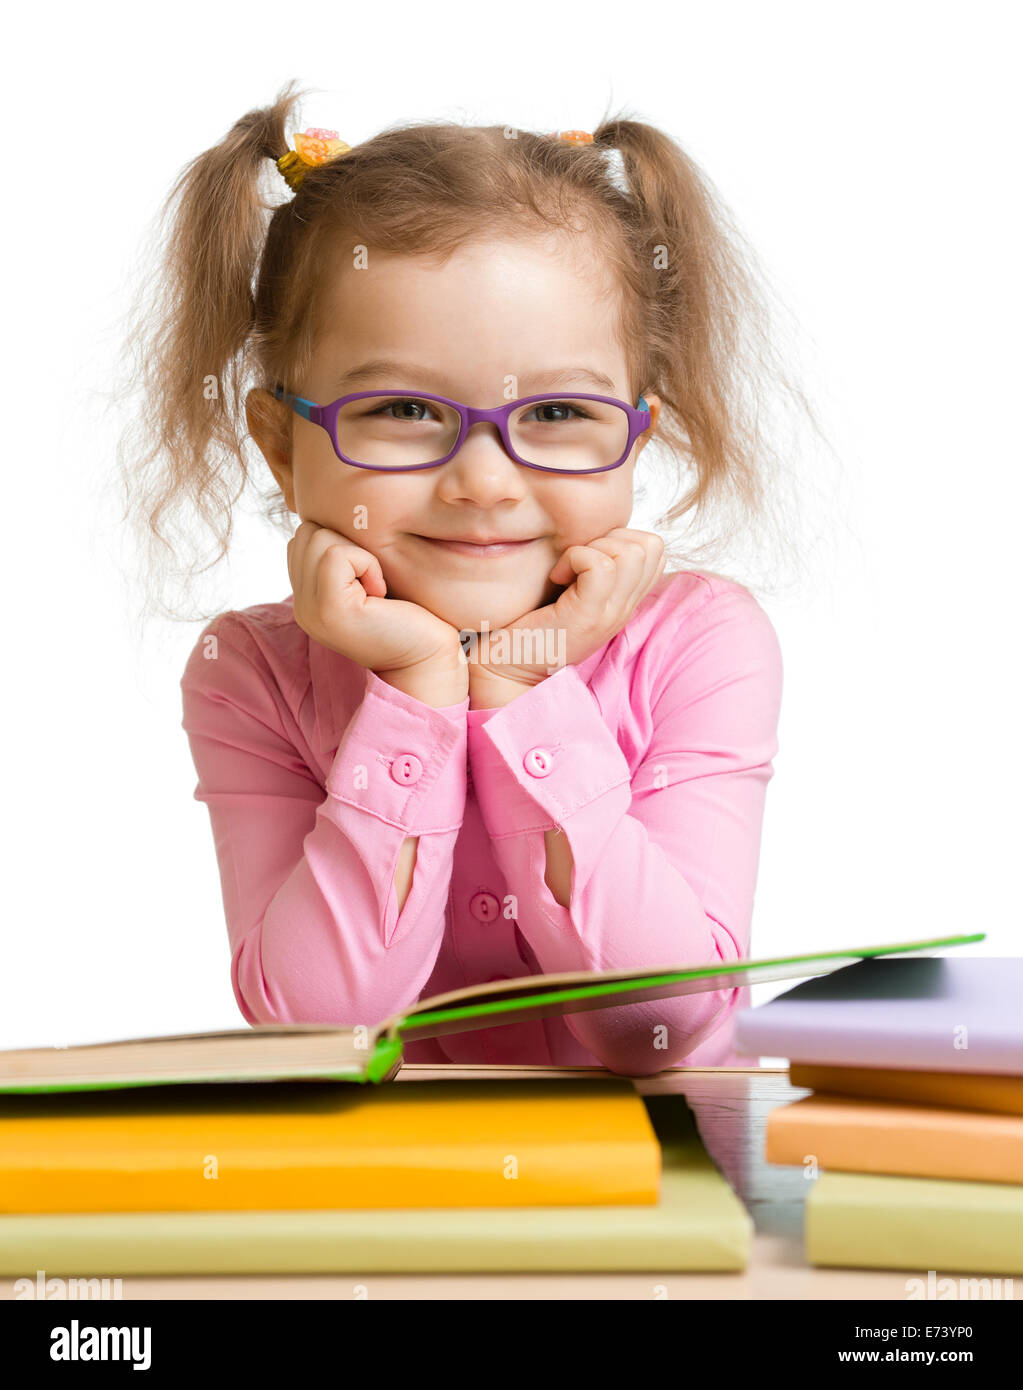 child girl in glasses reading book and smiling Stock Photo